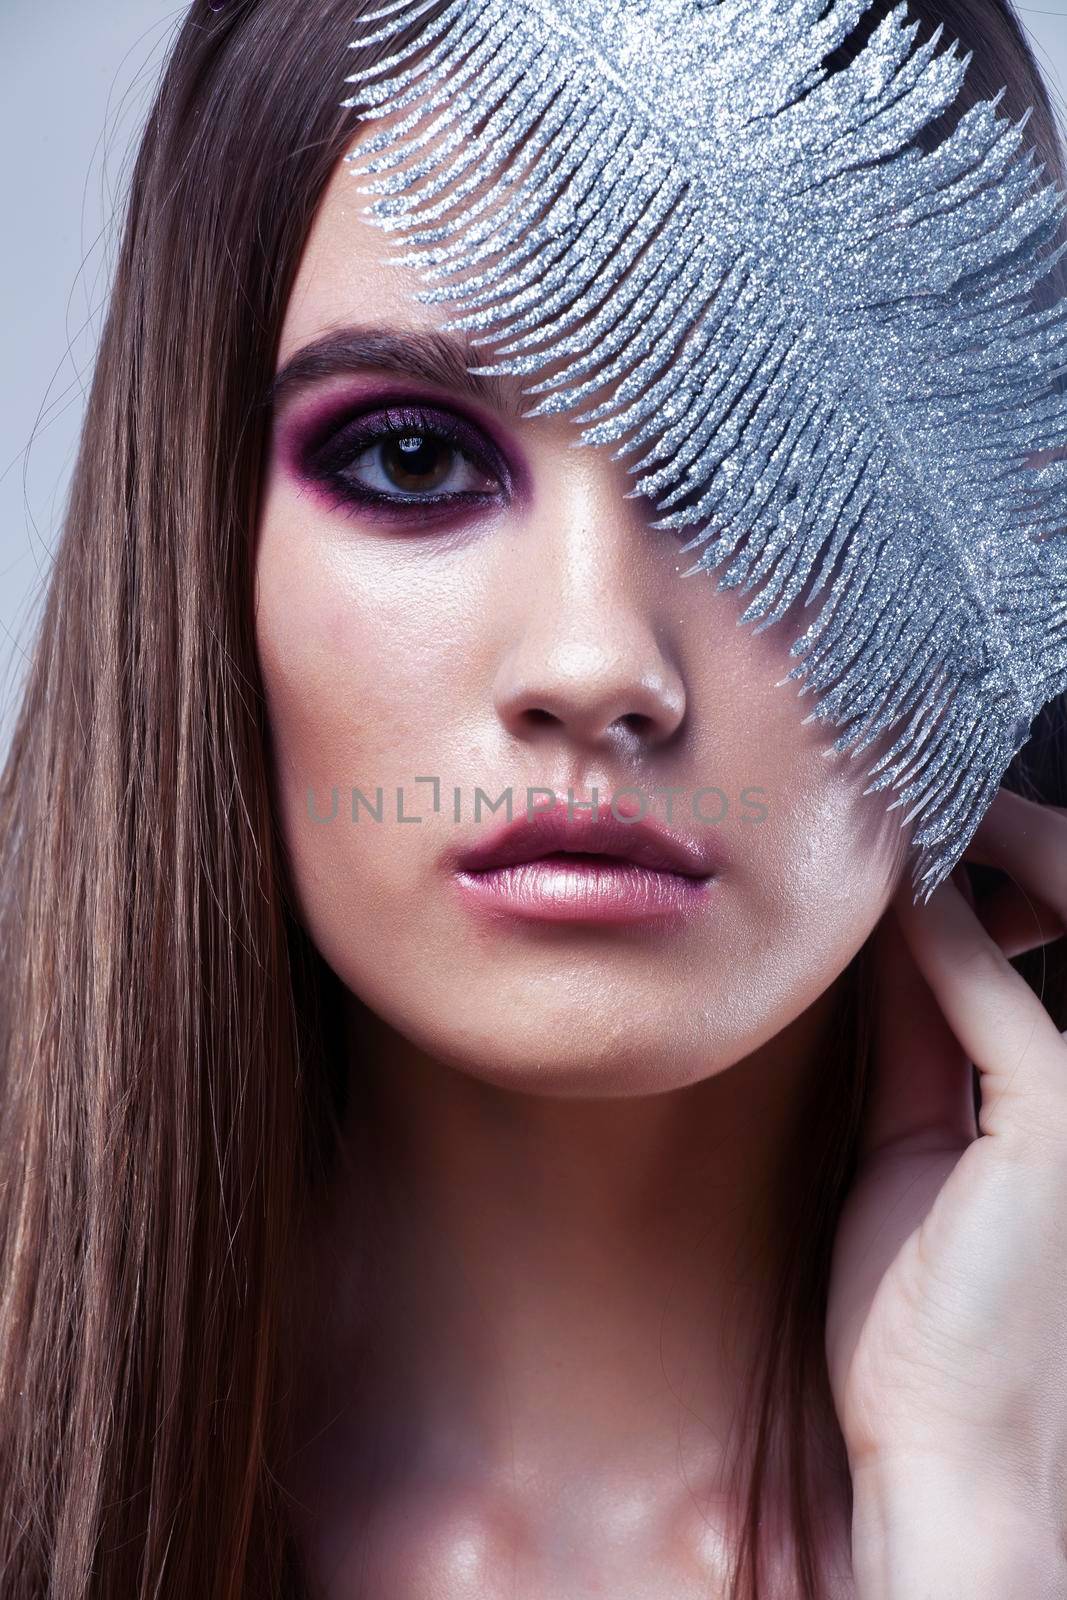 beauty brunette young girl with fashion makeup and silver feather close up on white background